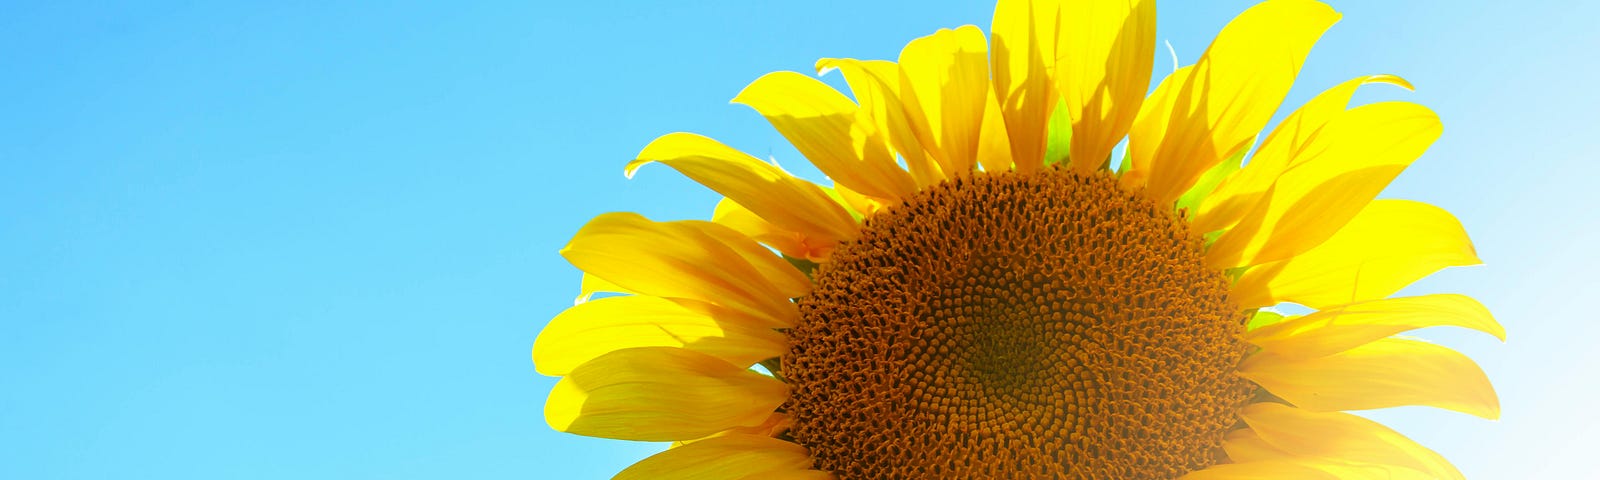 Close up photo of a sunflower on a blue background.